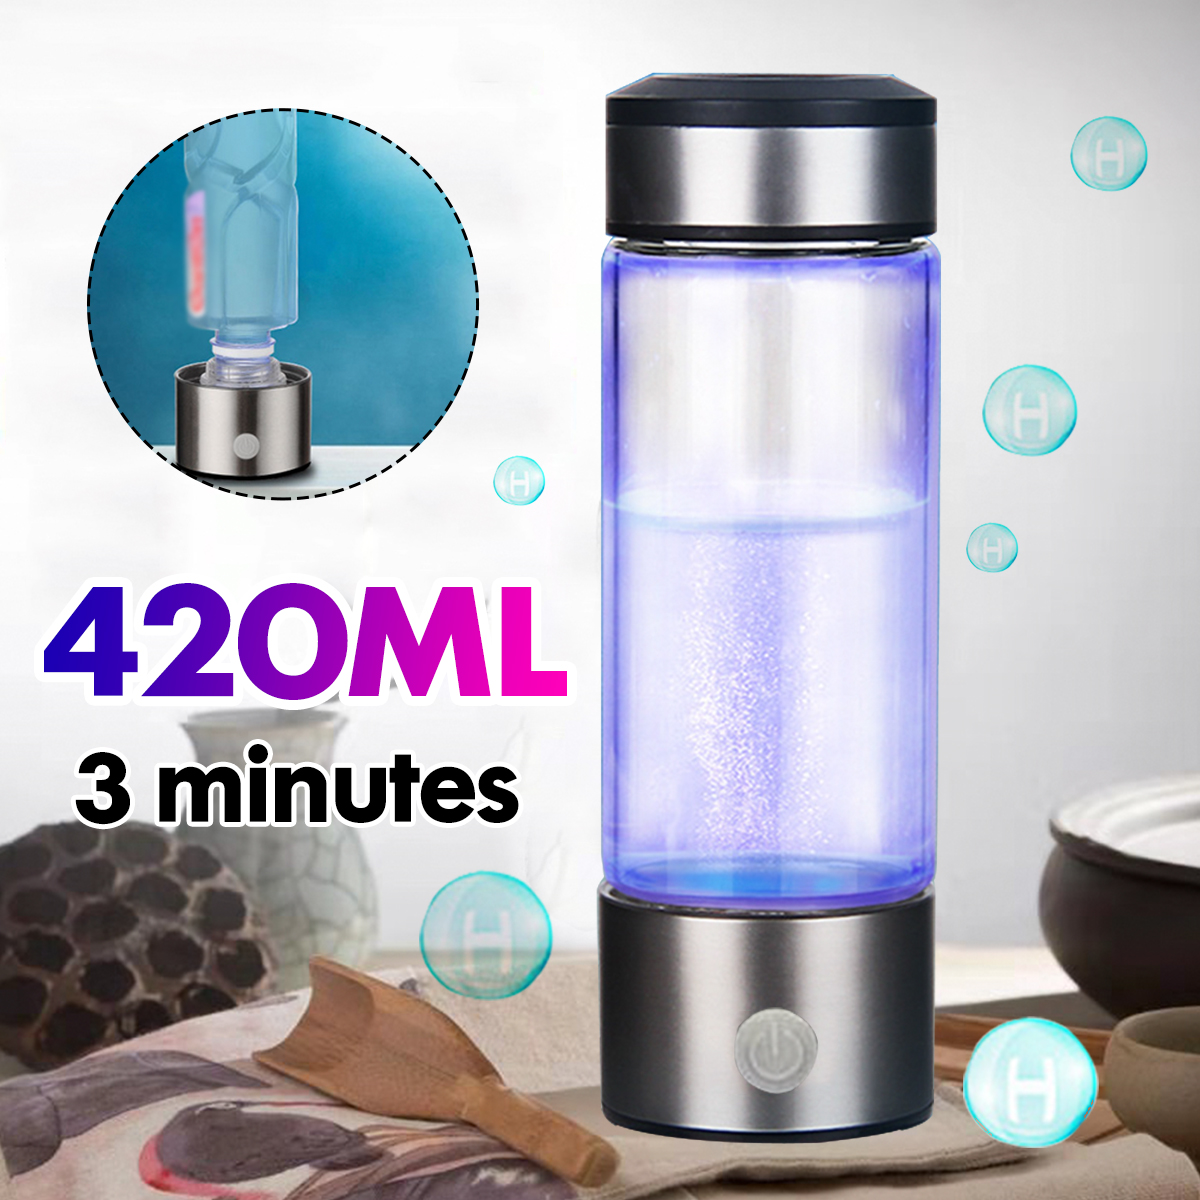 400ml-Water-Filter-Bottle-Hydrogen-Generator-Water-Cup-Reusable-Smart-3-Minutes-Electrolys-Water-Pur-1731189-1